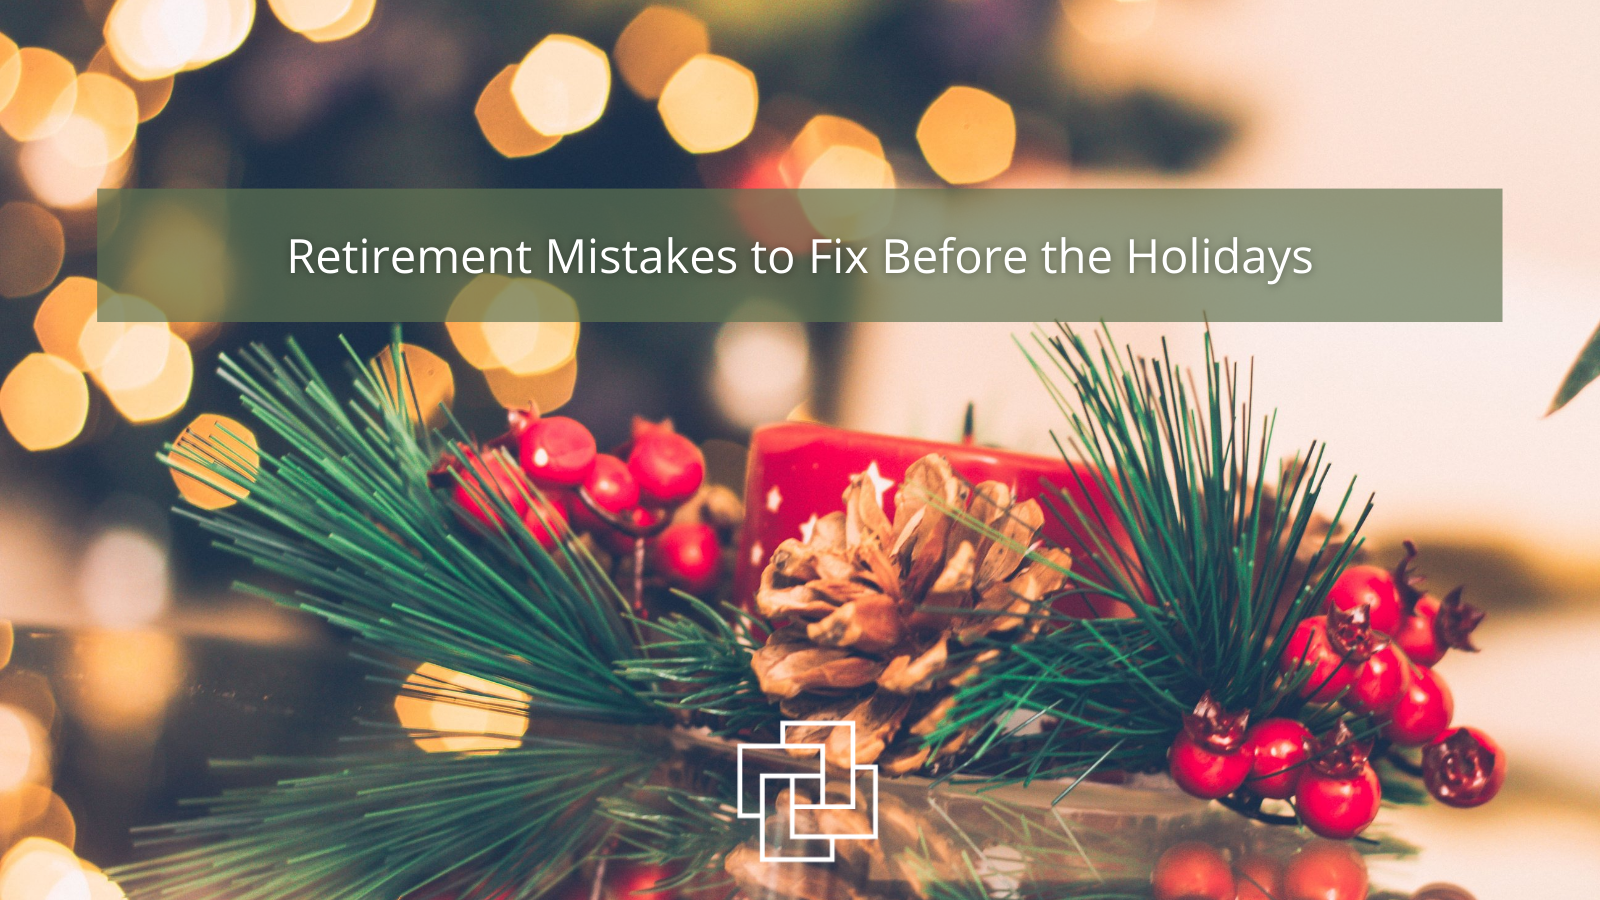 Retirement Mistakes to Fix Before the Holidays